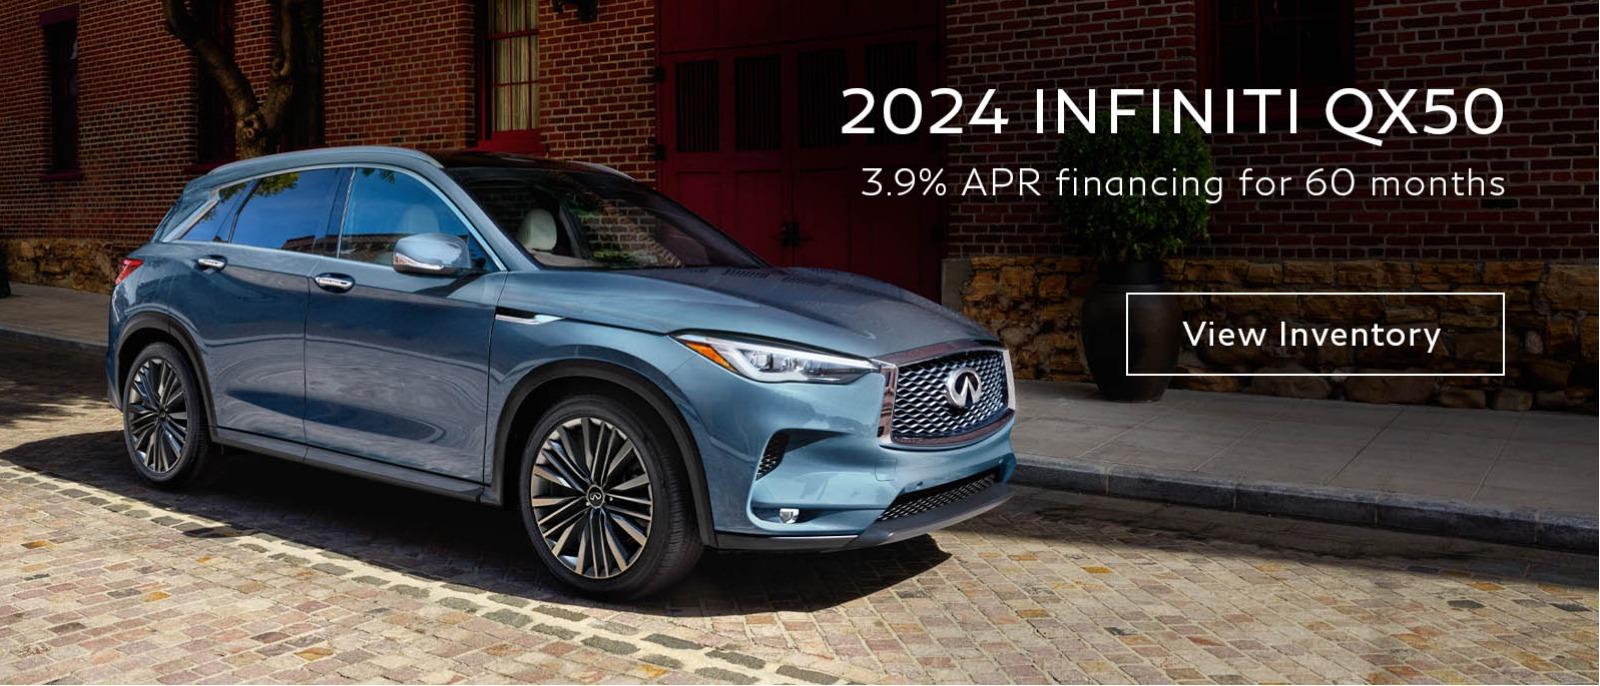 3.9% APR Financing for 60 Months on 2024 INFINTI QX50